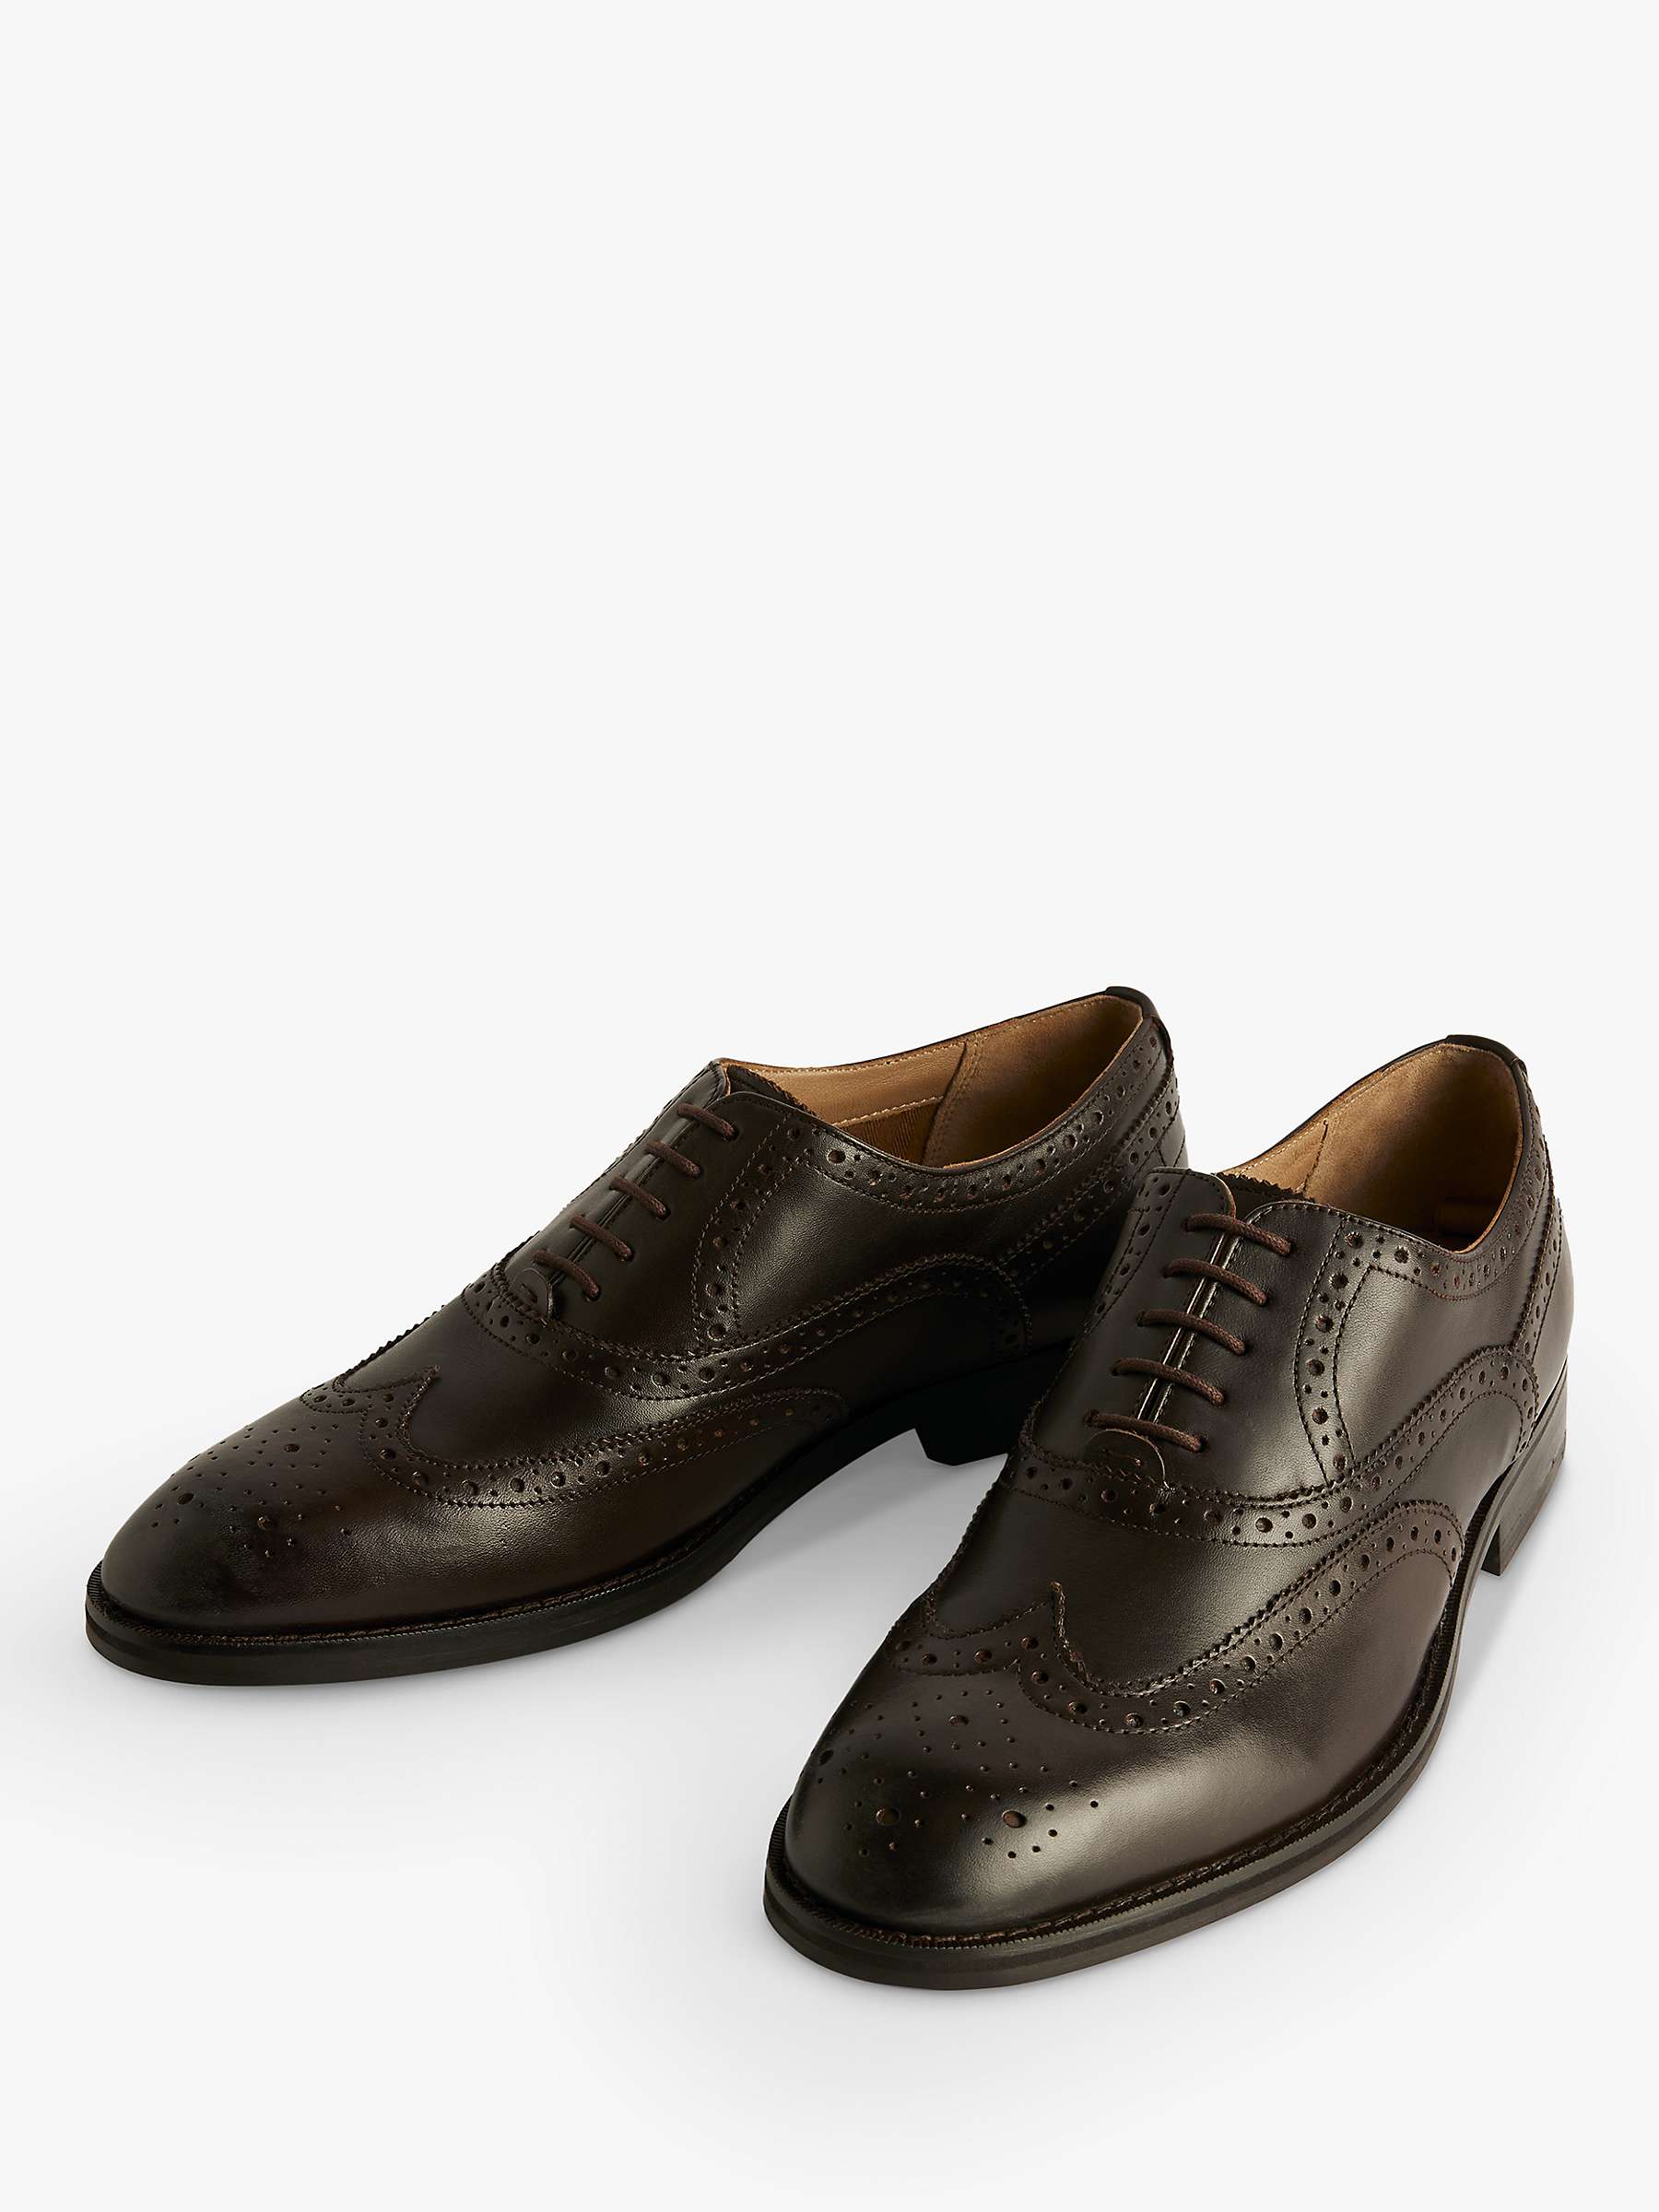 Buy Ted Baker Arnie Leather Oxford Brogues Online at johnlewis.com